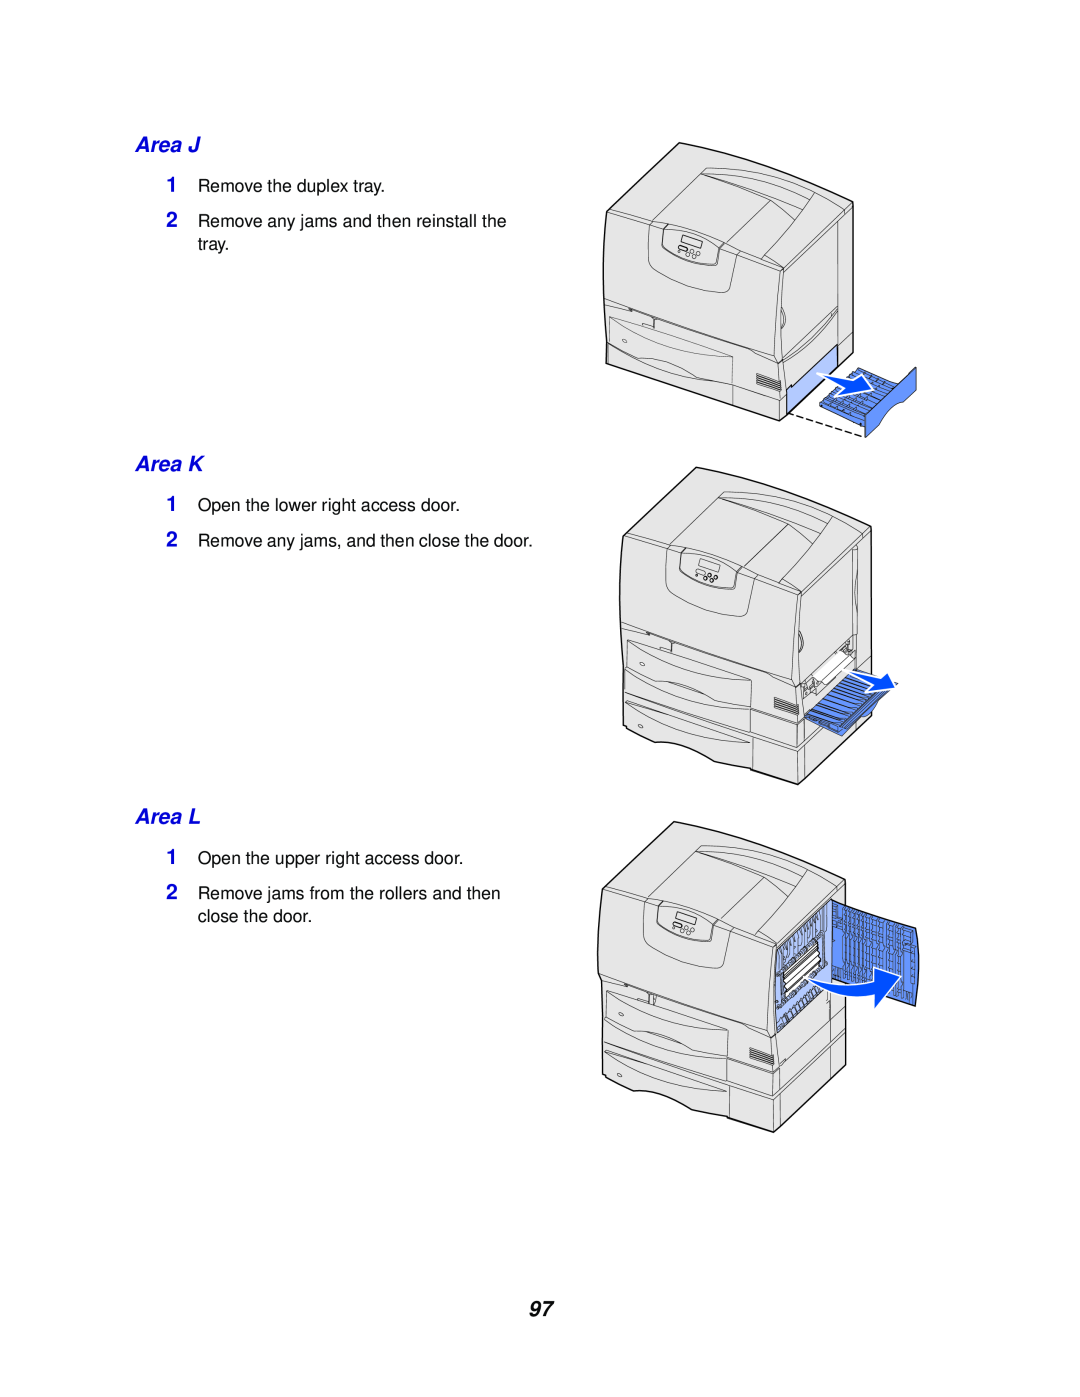 Lexmark 762 manual Area J, Area K, Area L, 1Remove the duplex tray, 2Remove any jams and then reinstall the tray 